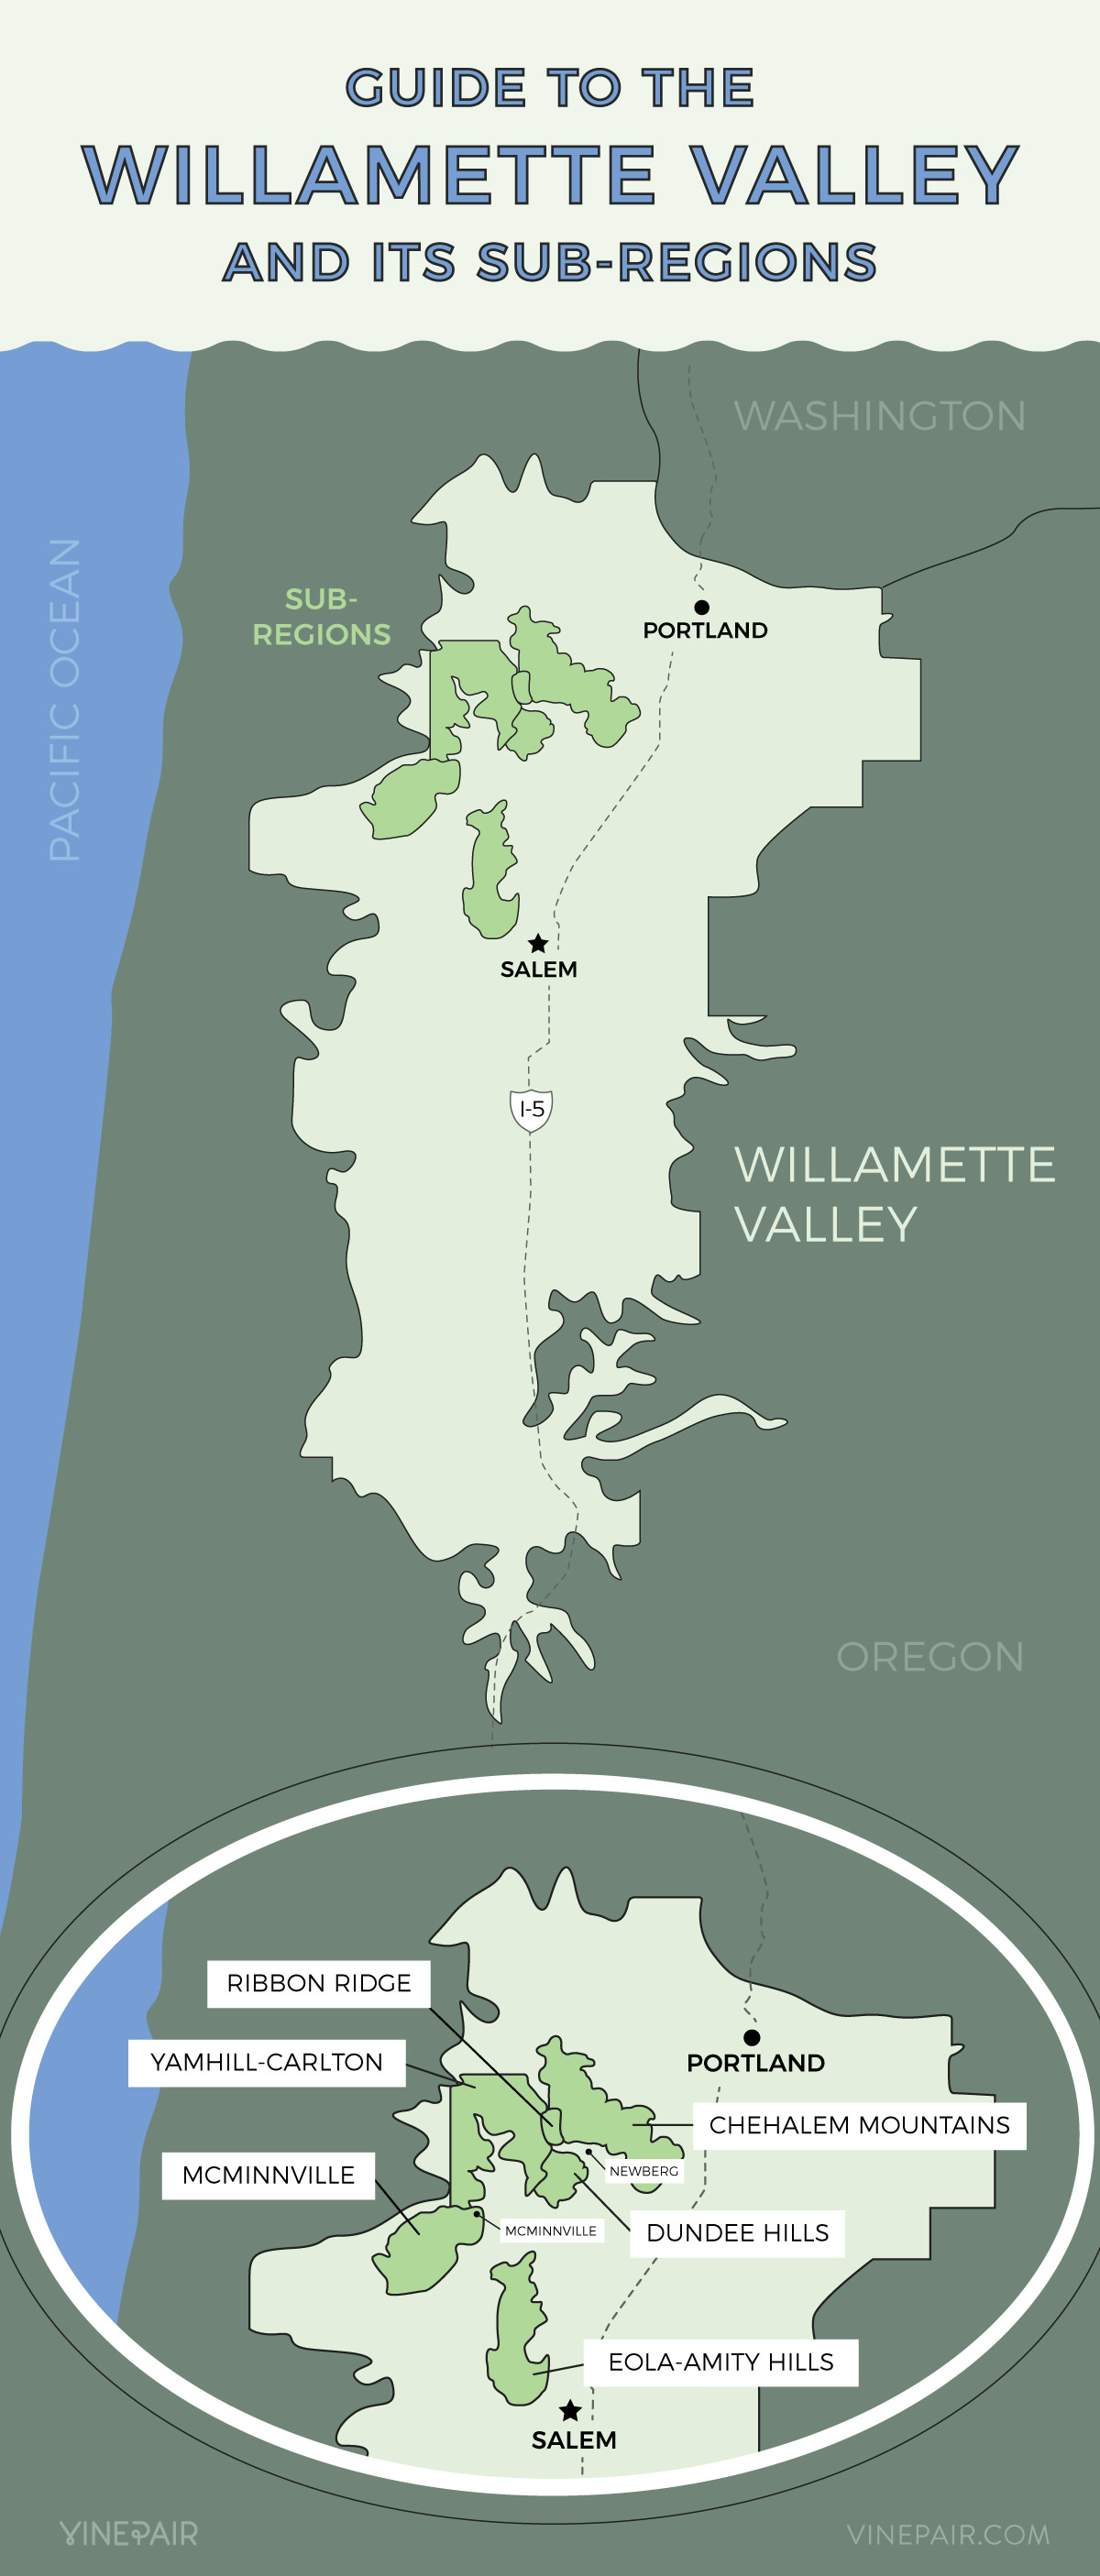 A Guide to the Willamette Valley